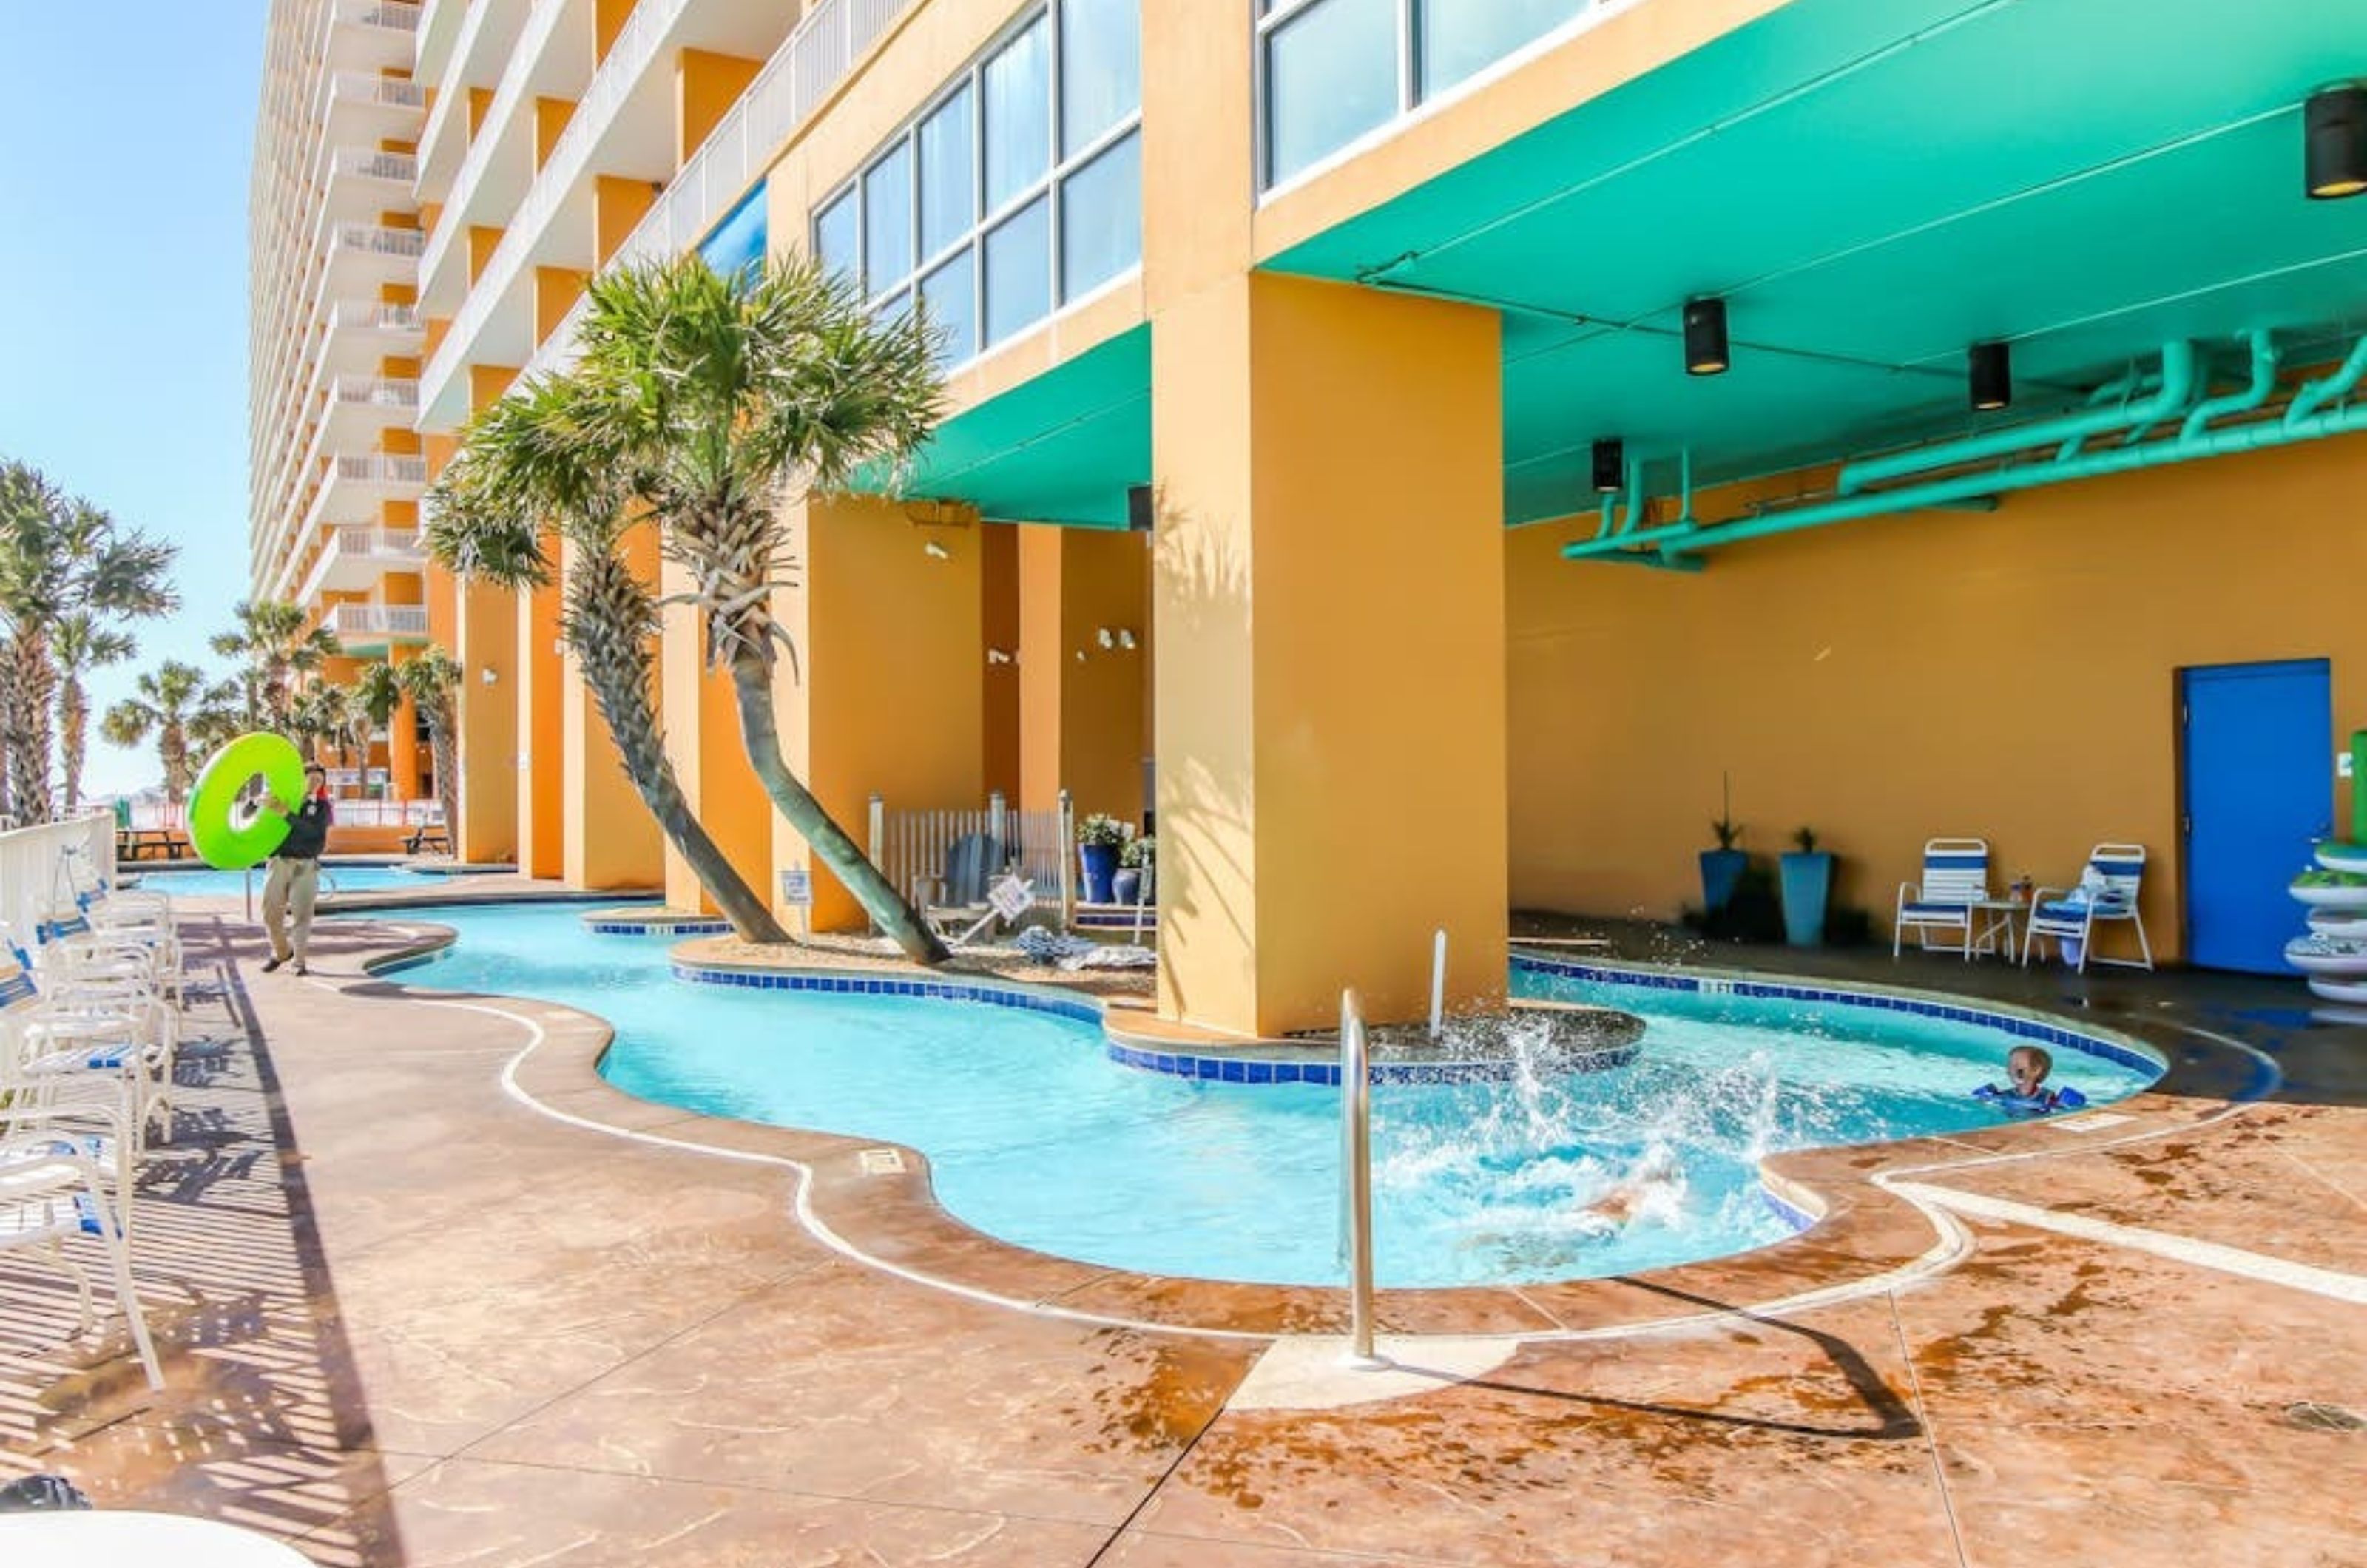 The indoor and outdoor lazy river in front of Splash Resort in Panama City Beach Florida